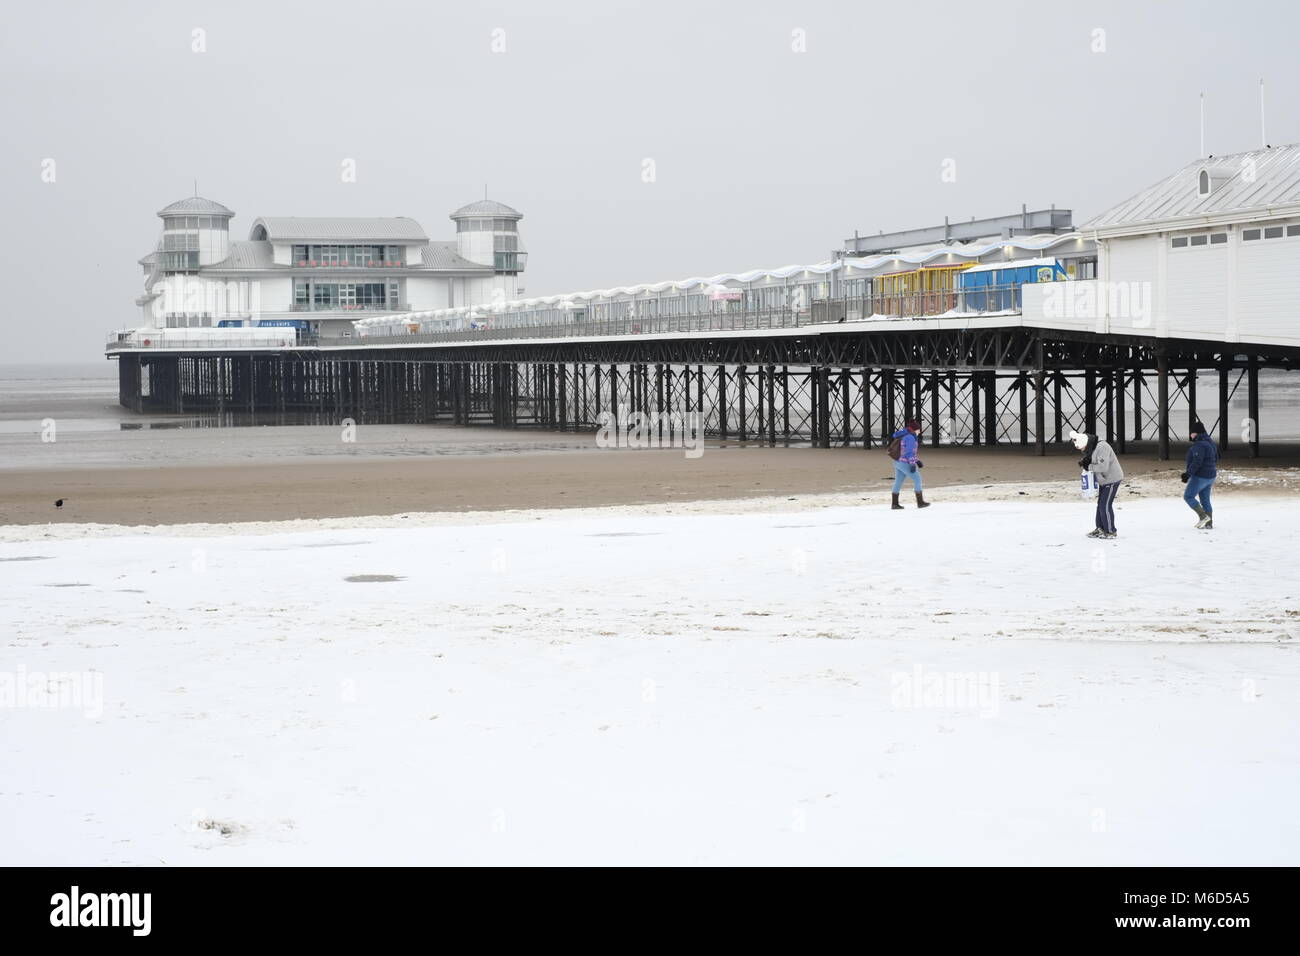 The Grand Pier. Weston super mare. UK. 2nd March, 2018. Snow on the beach with people milling around.credit: /Alamy Live News Stock Photo